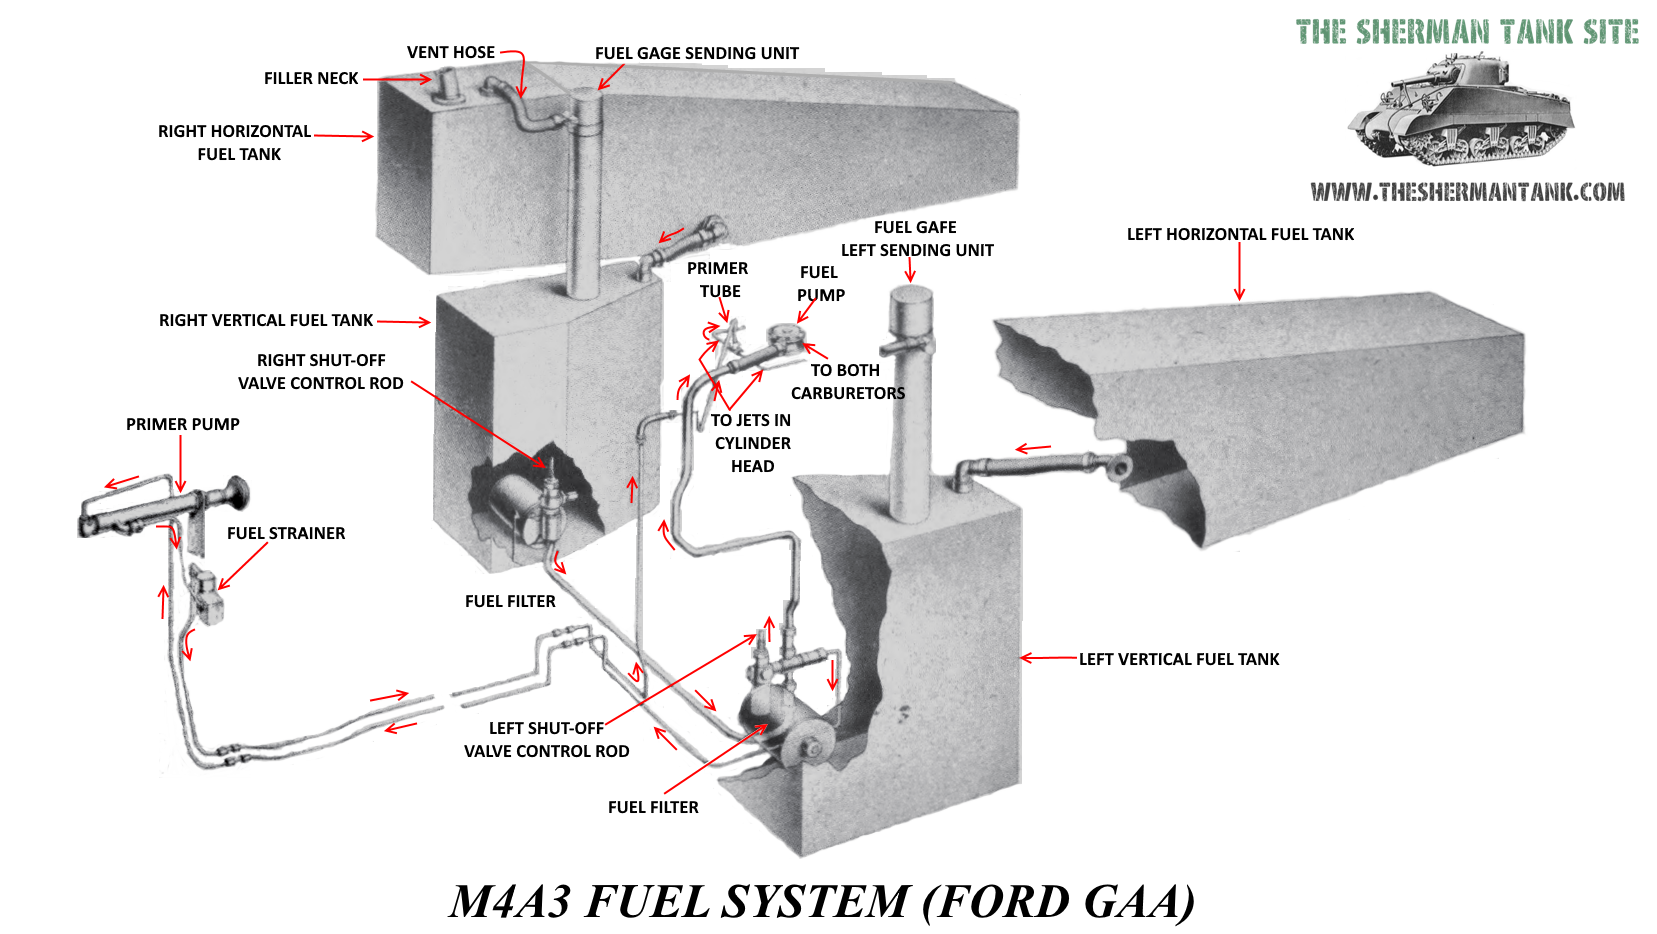 https://www.theshermantank.com/wp-content/uploads/ford-GAA-fuel-system-A3-tanks-improved-FLAT.png